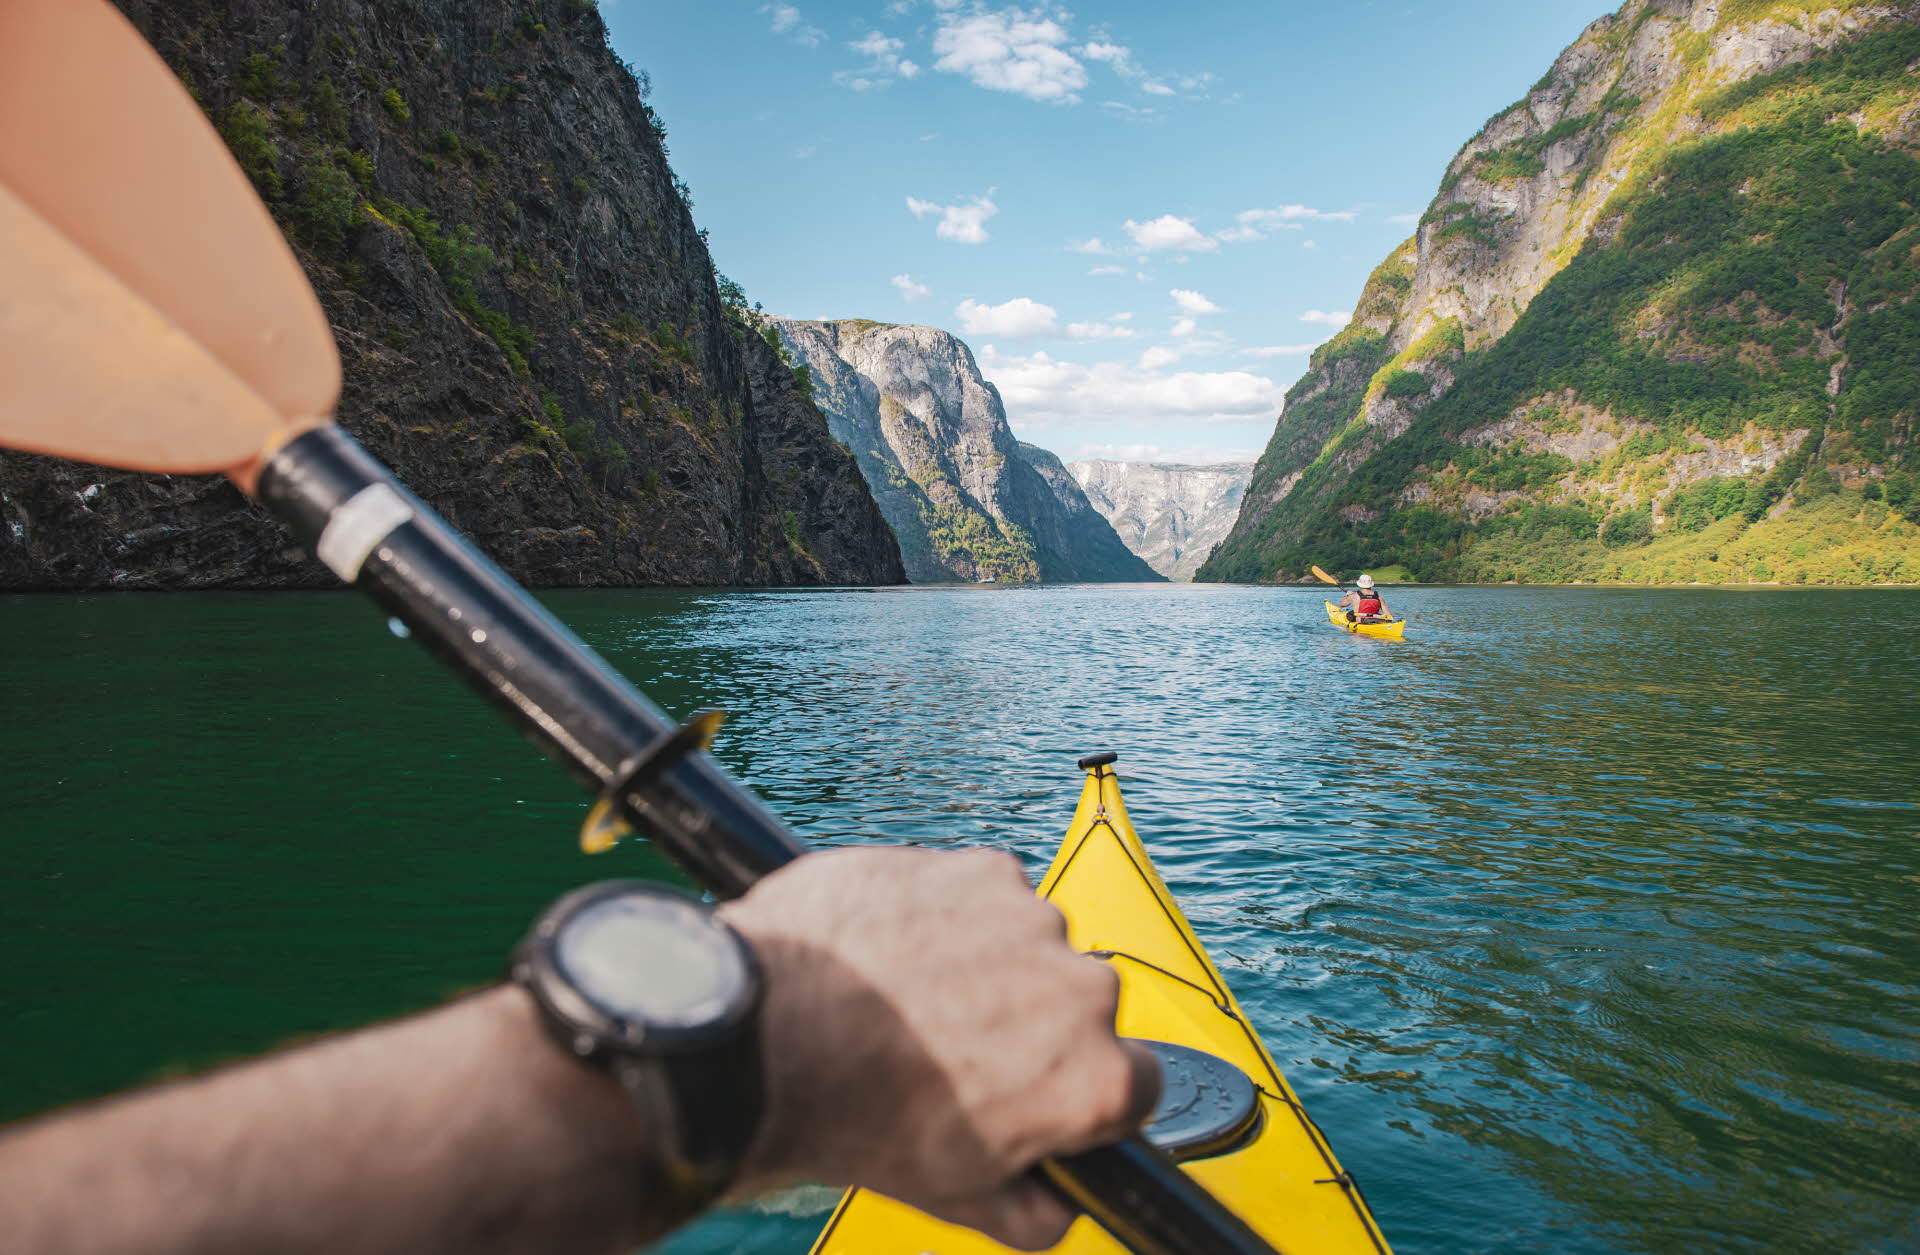 A hand holding a paddle over a yellow kayak. Another kayaker, the Nærøøyfjord and mountains in the foreground.